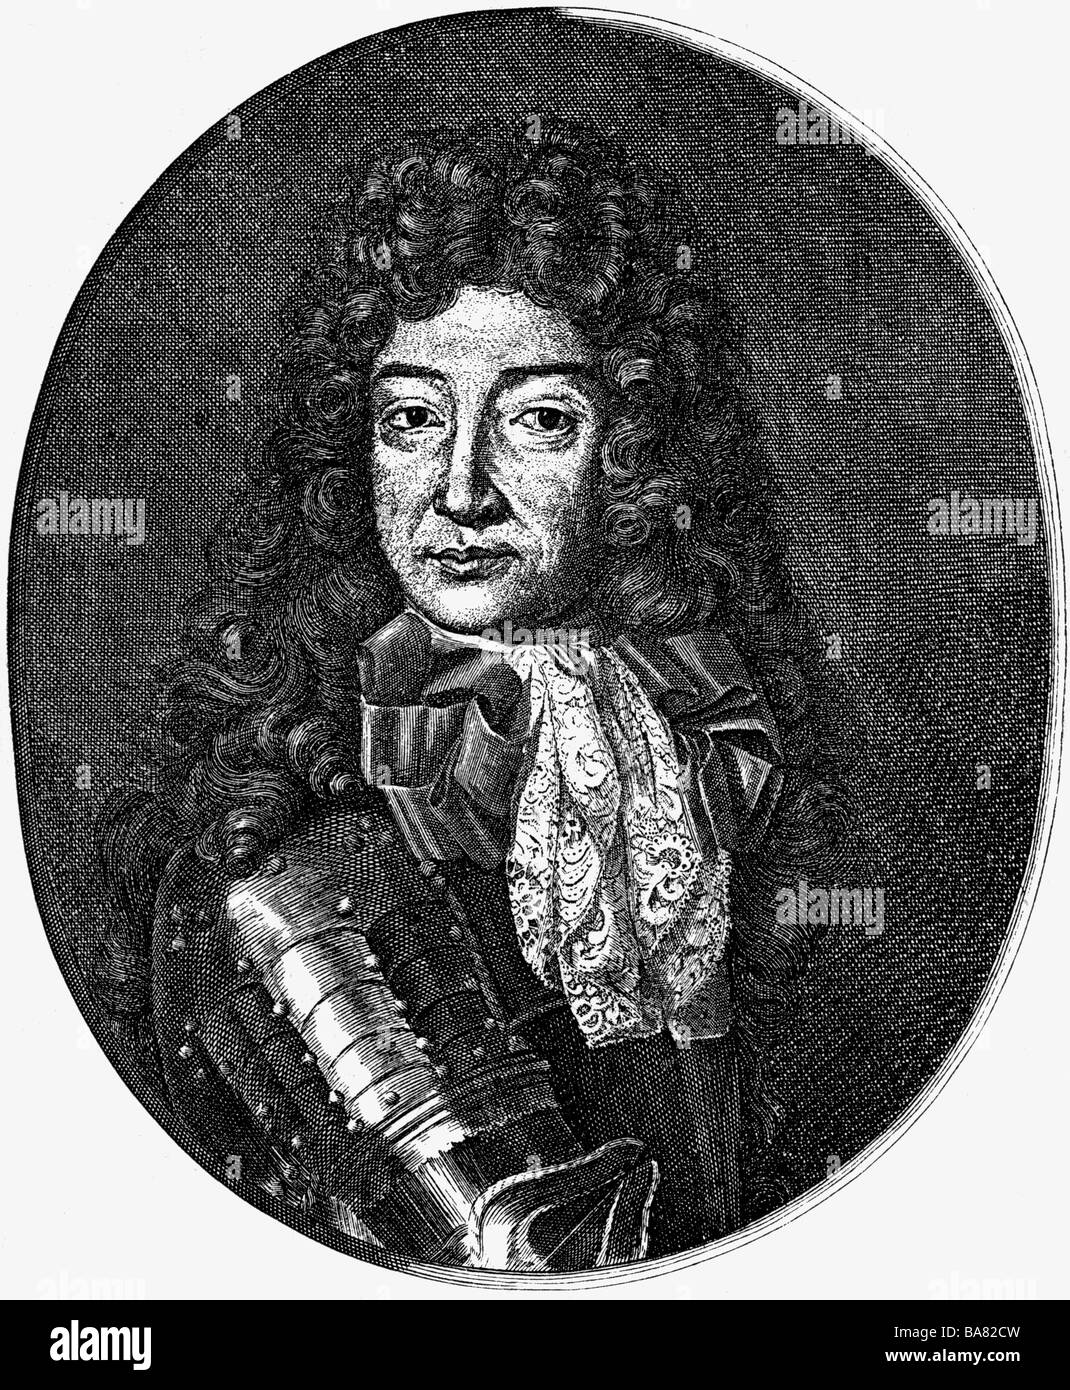 Catinat de La Fauconnerie, Nicolas III, 1.9.1637 - 25.2.1712, French general, portrait, copper engraving, late 17th century, , Artist's Copyright has not to be cleared Stock Photo